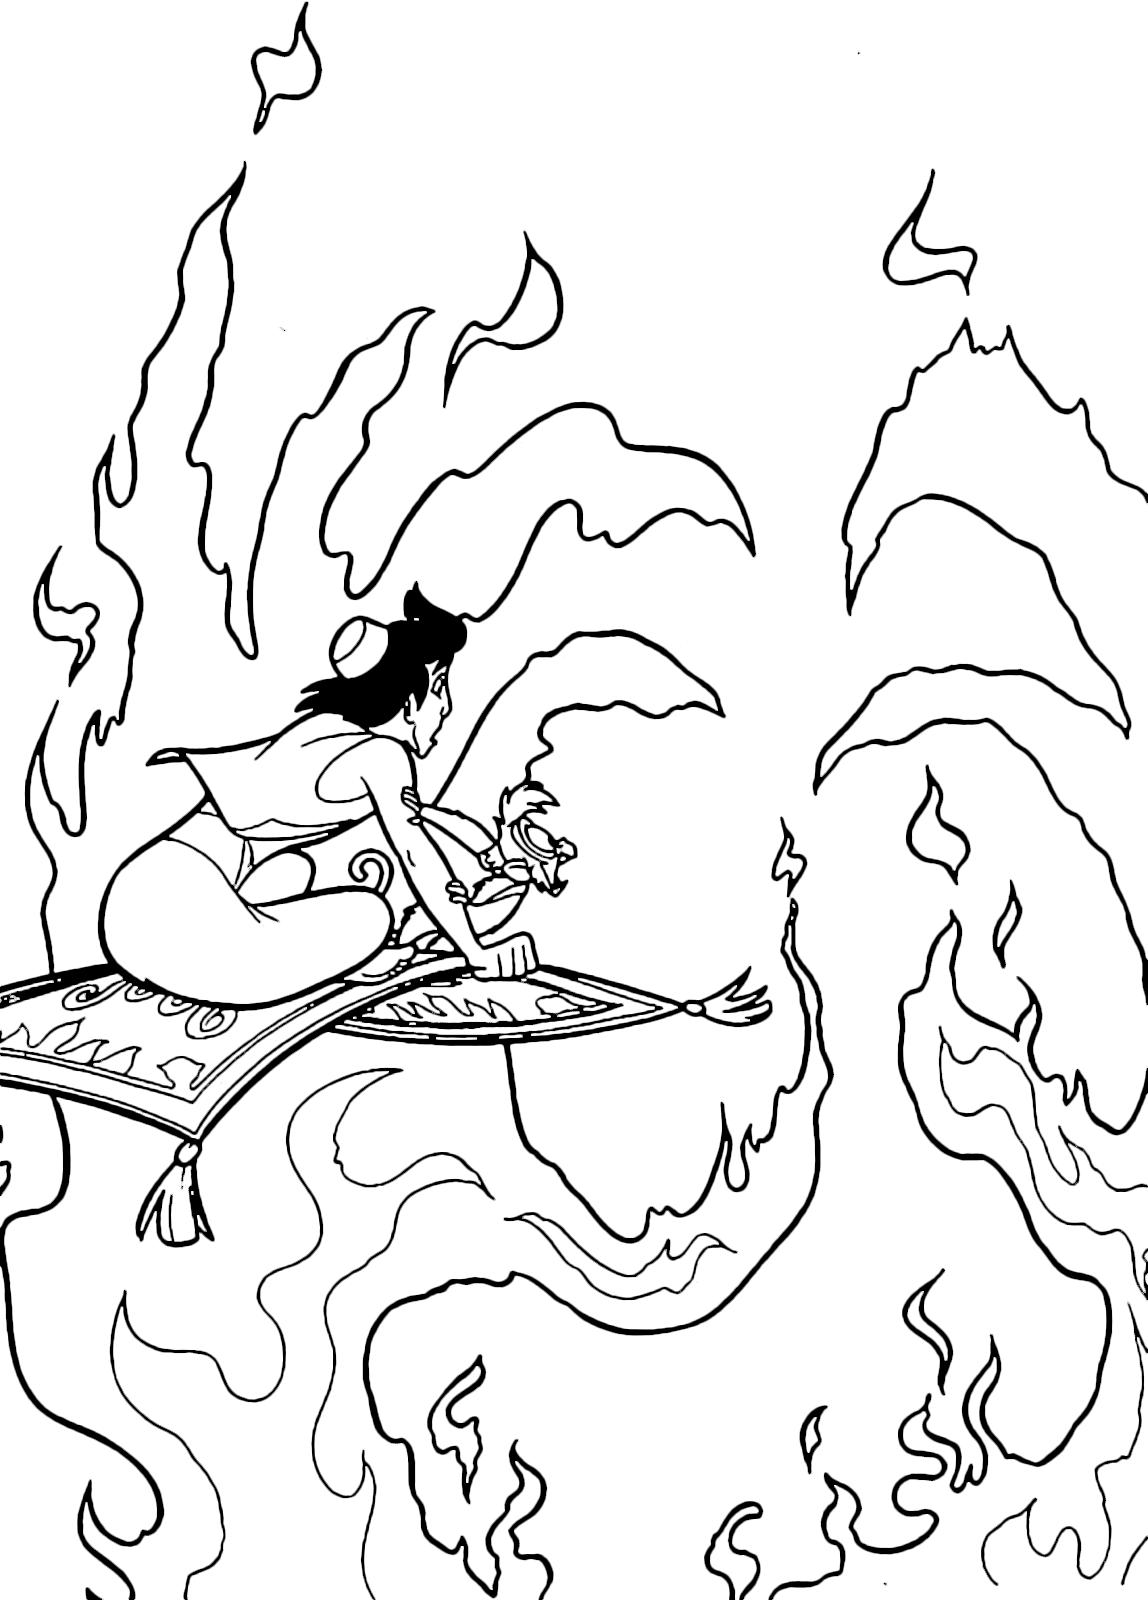 Aladdin Aladdin And Abu Fly On The Magic Carpet In The Middle Of The Flames